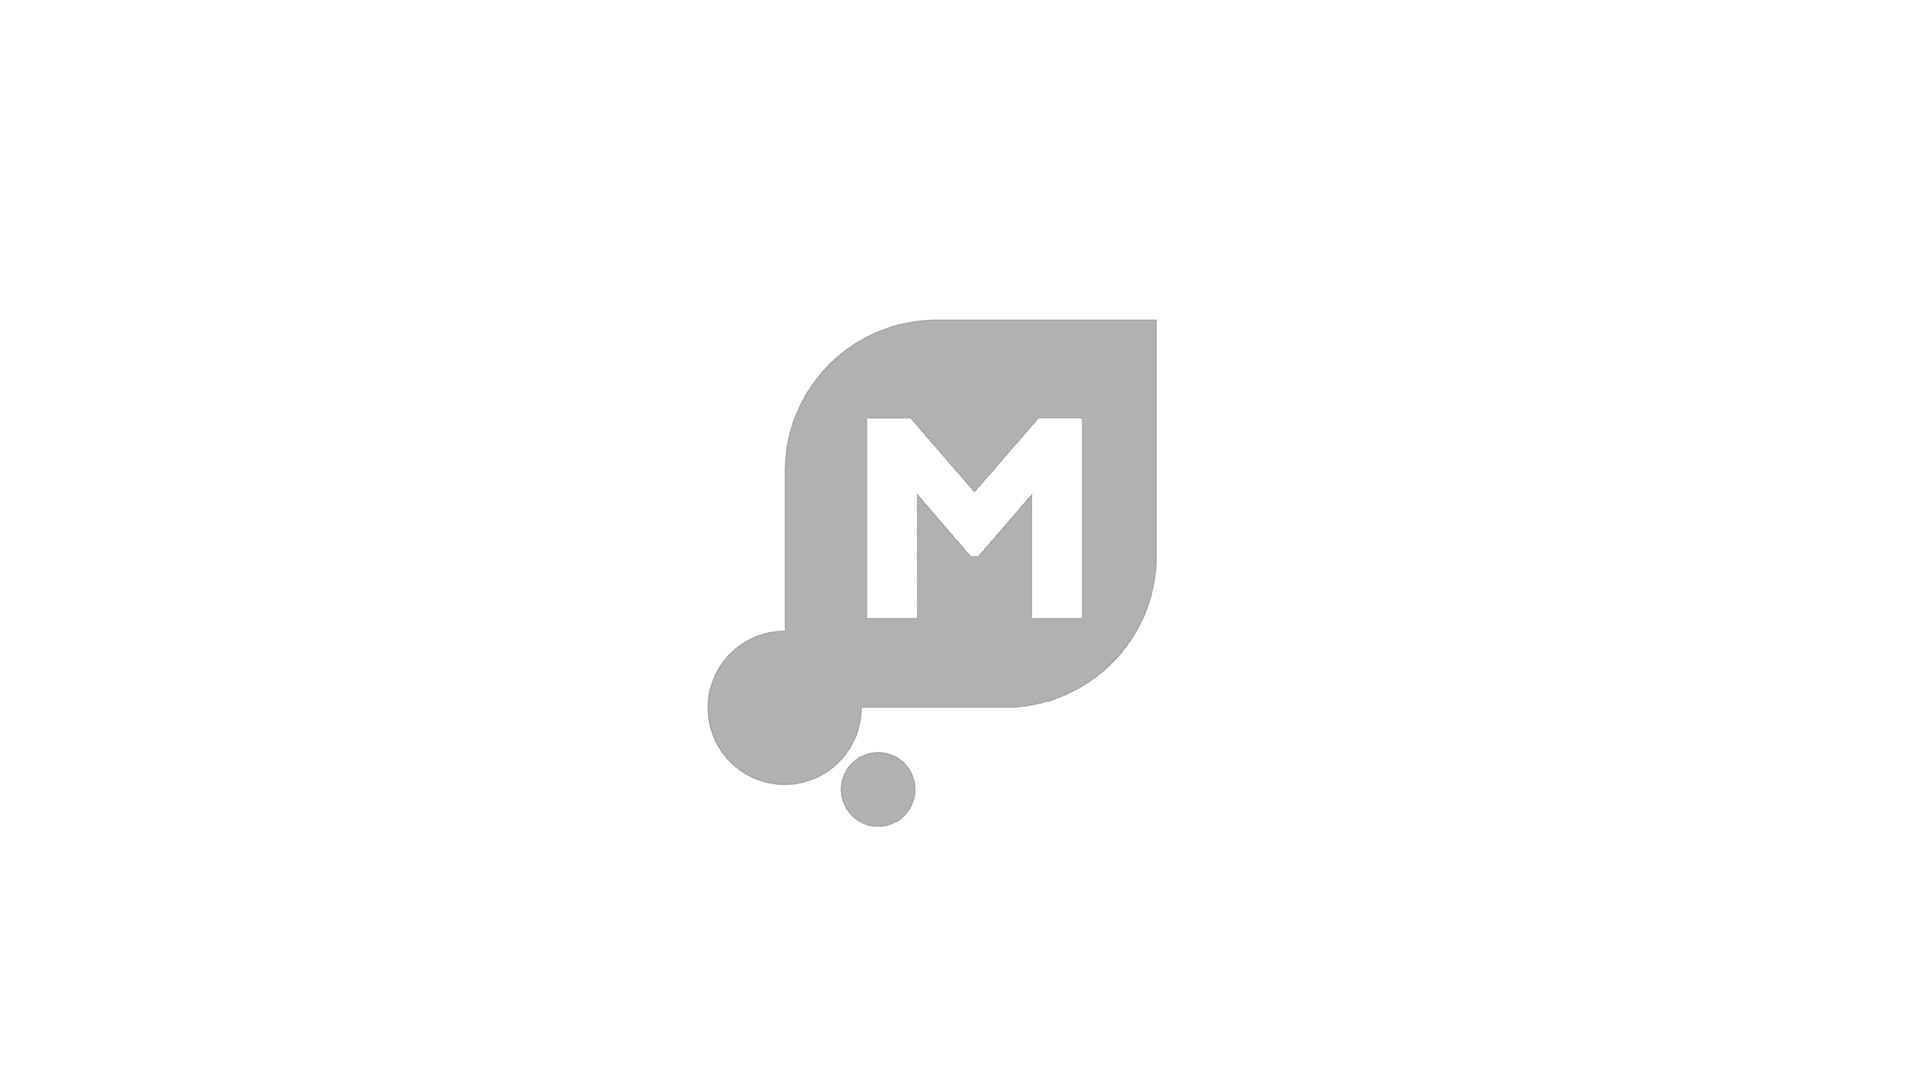 The Mintel profile icon with the 'M' of the Mintel logo in white text inside a light grey speech bubble